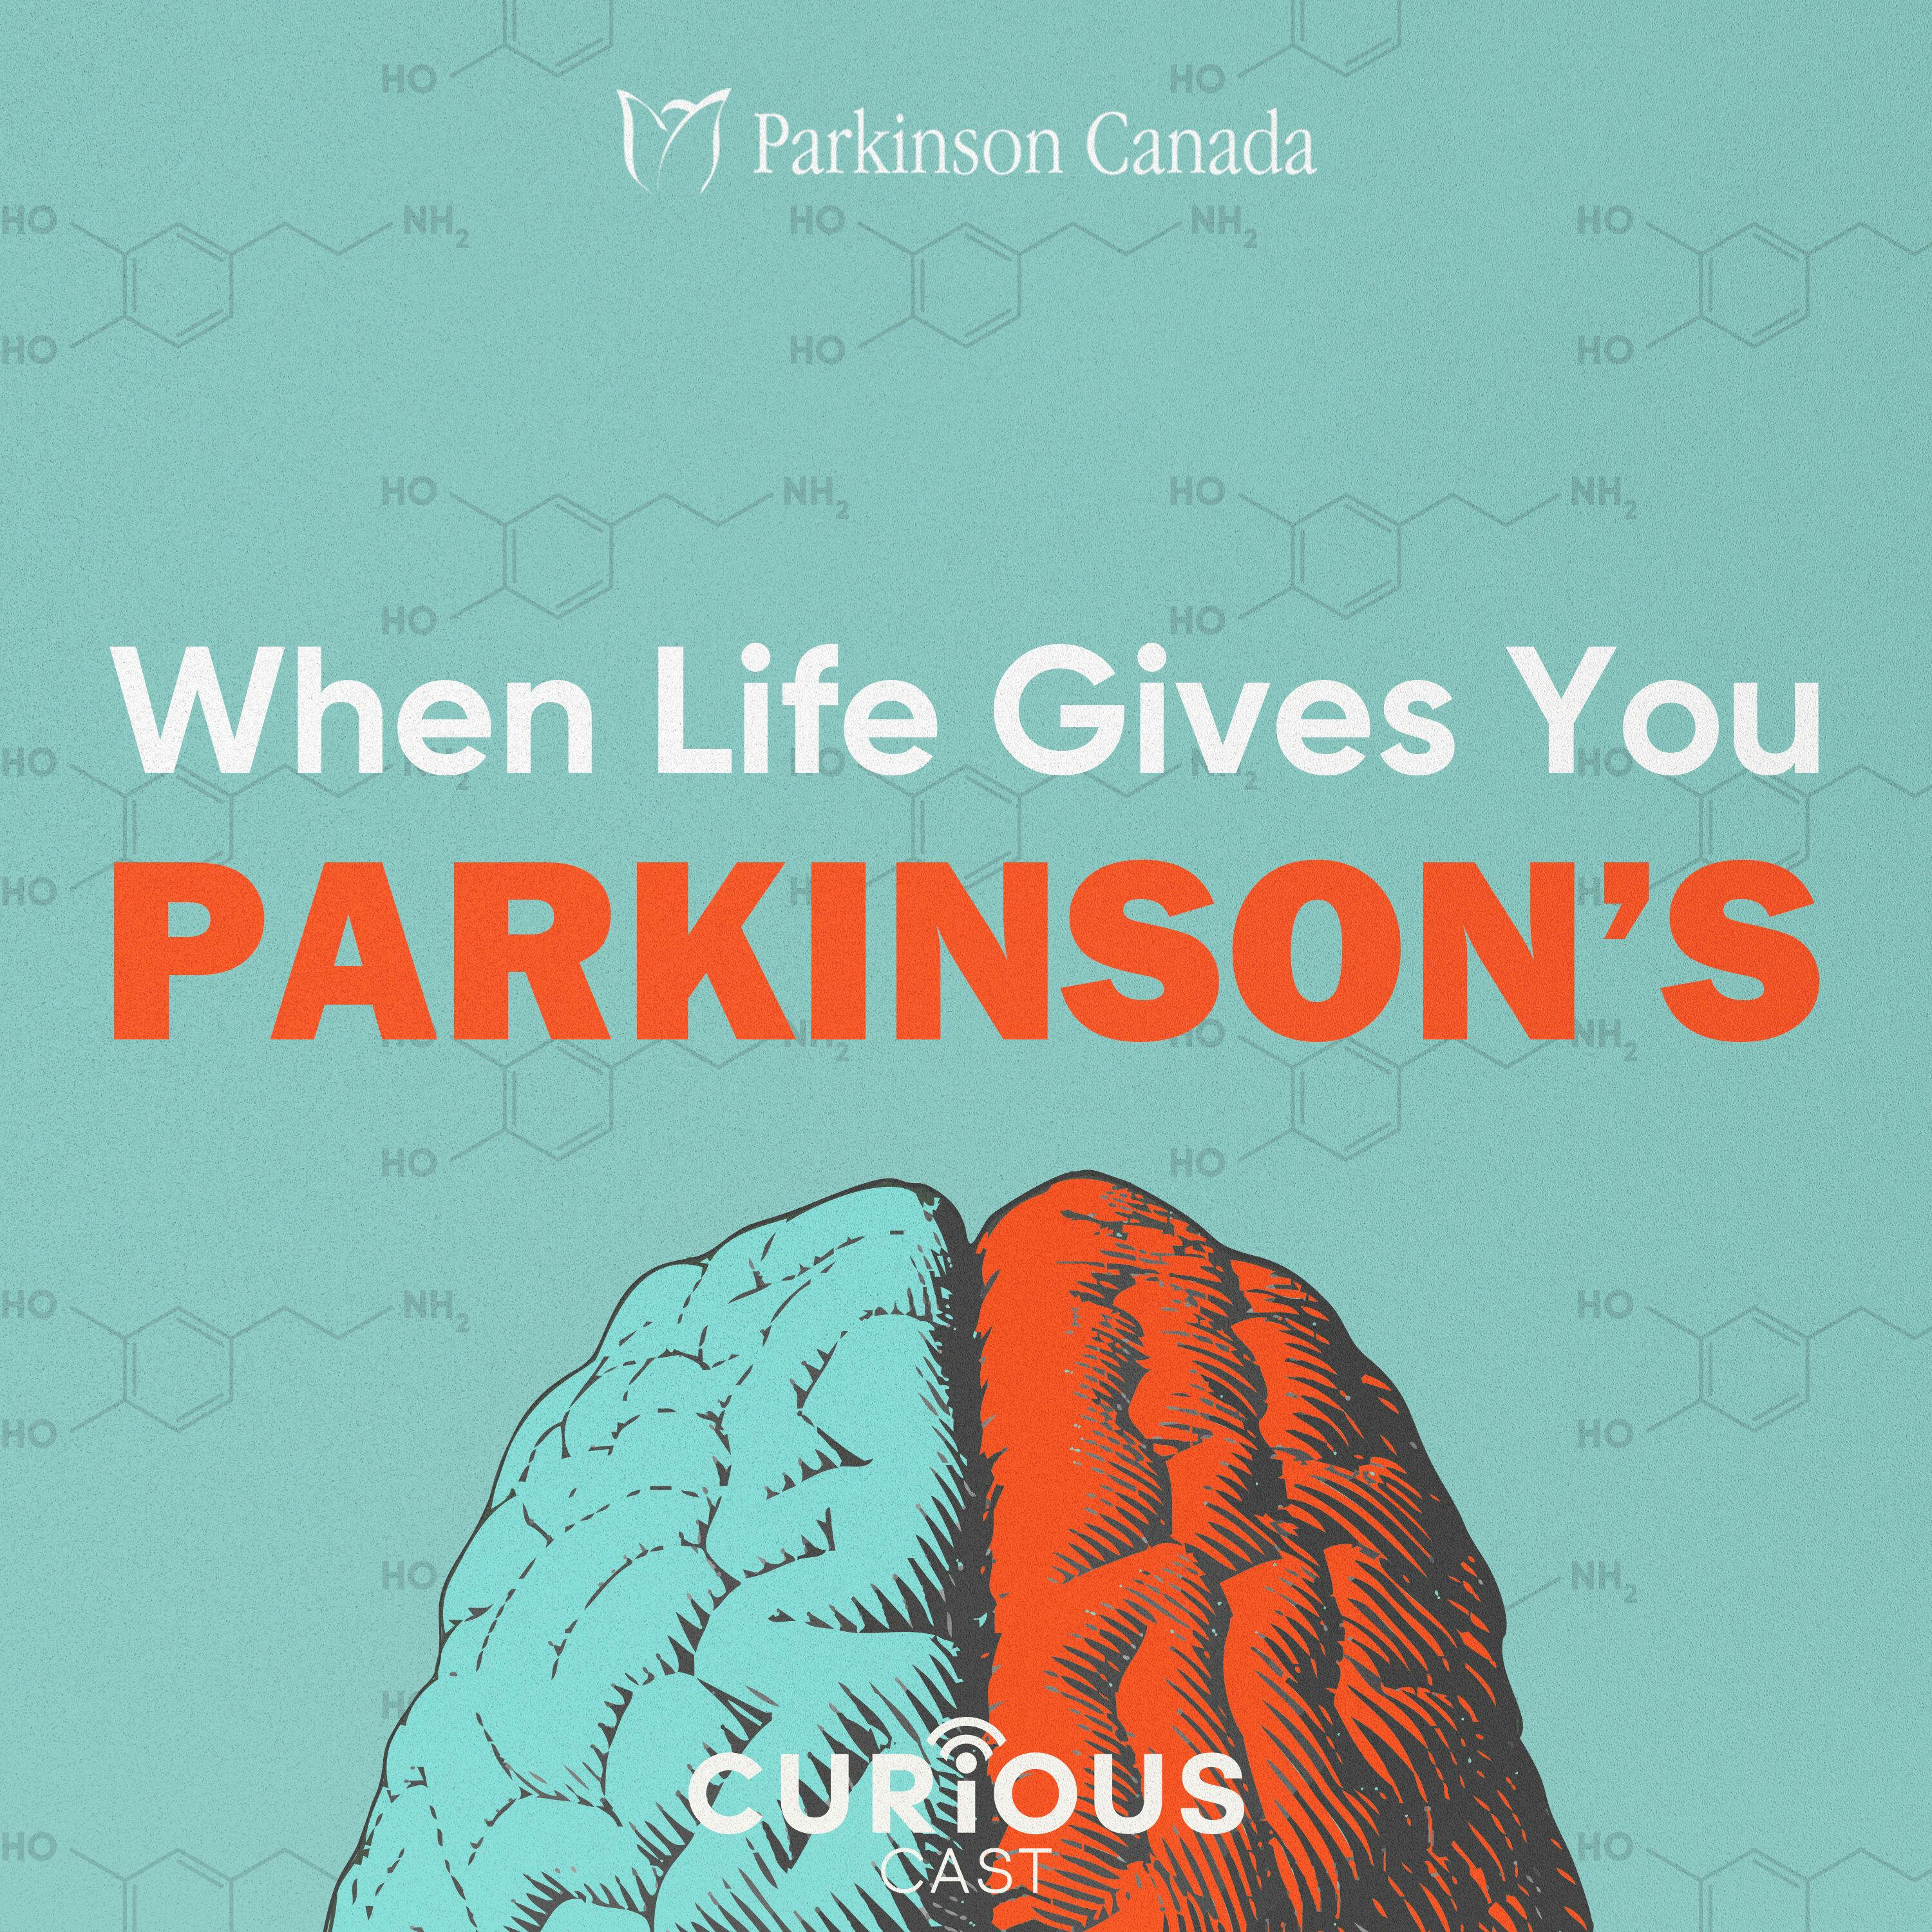 It’s Parkinson Diseases with an “s” WPC2019 | 10